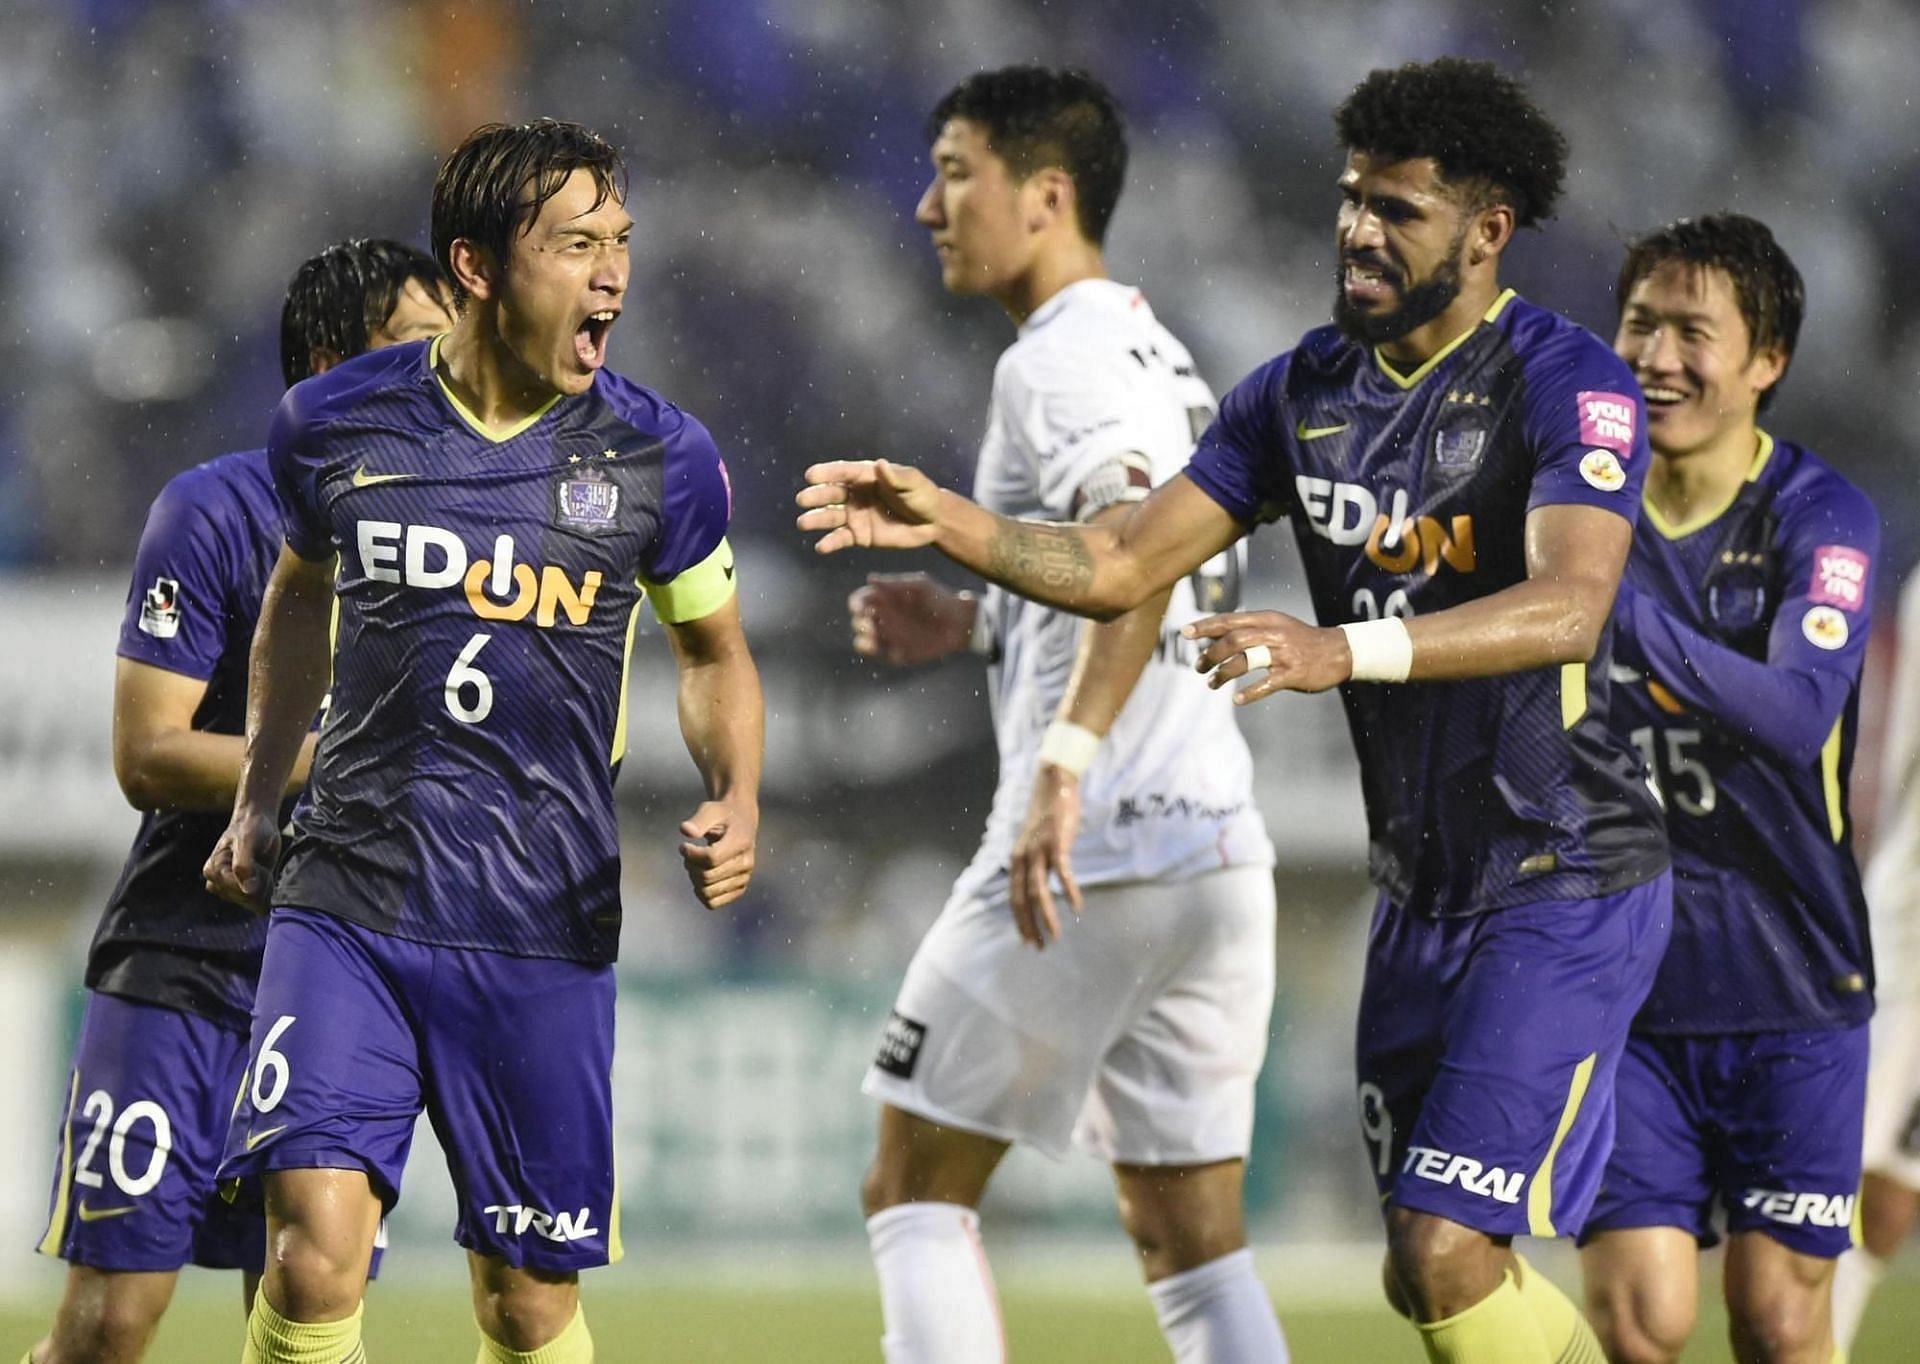 Cerezo Osaka and Hiroshima Sanfrecce meet in the J League Cup title-decider on Saturday